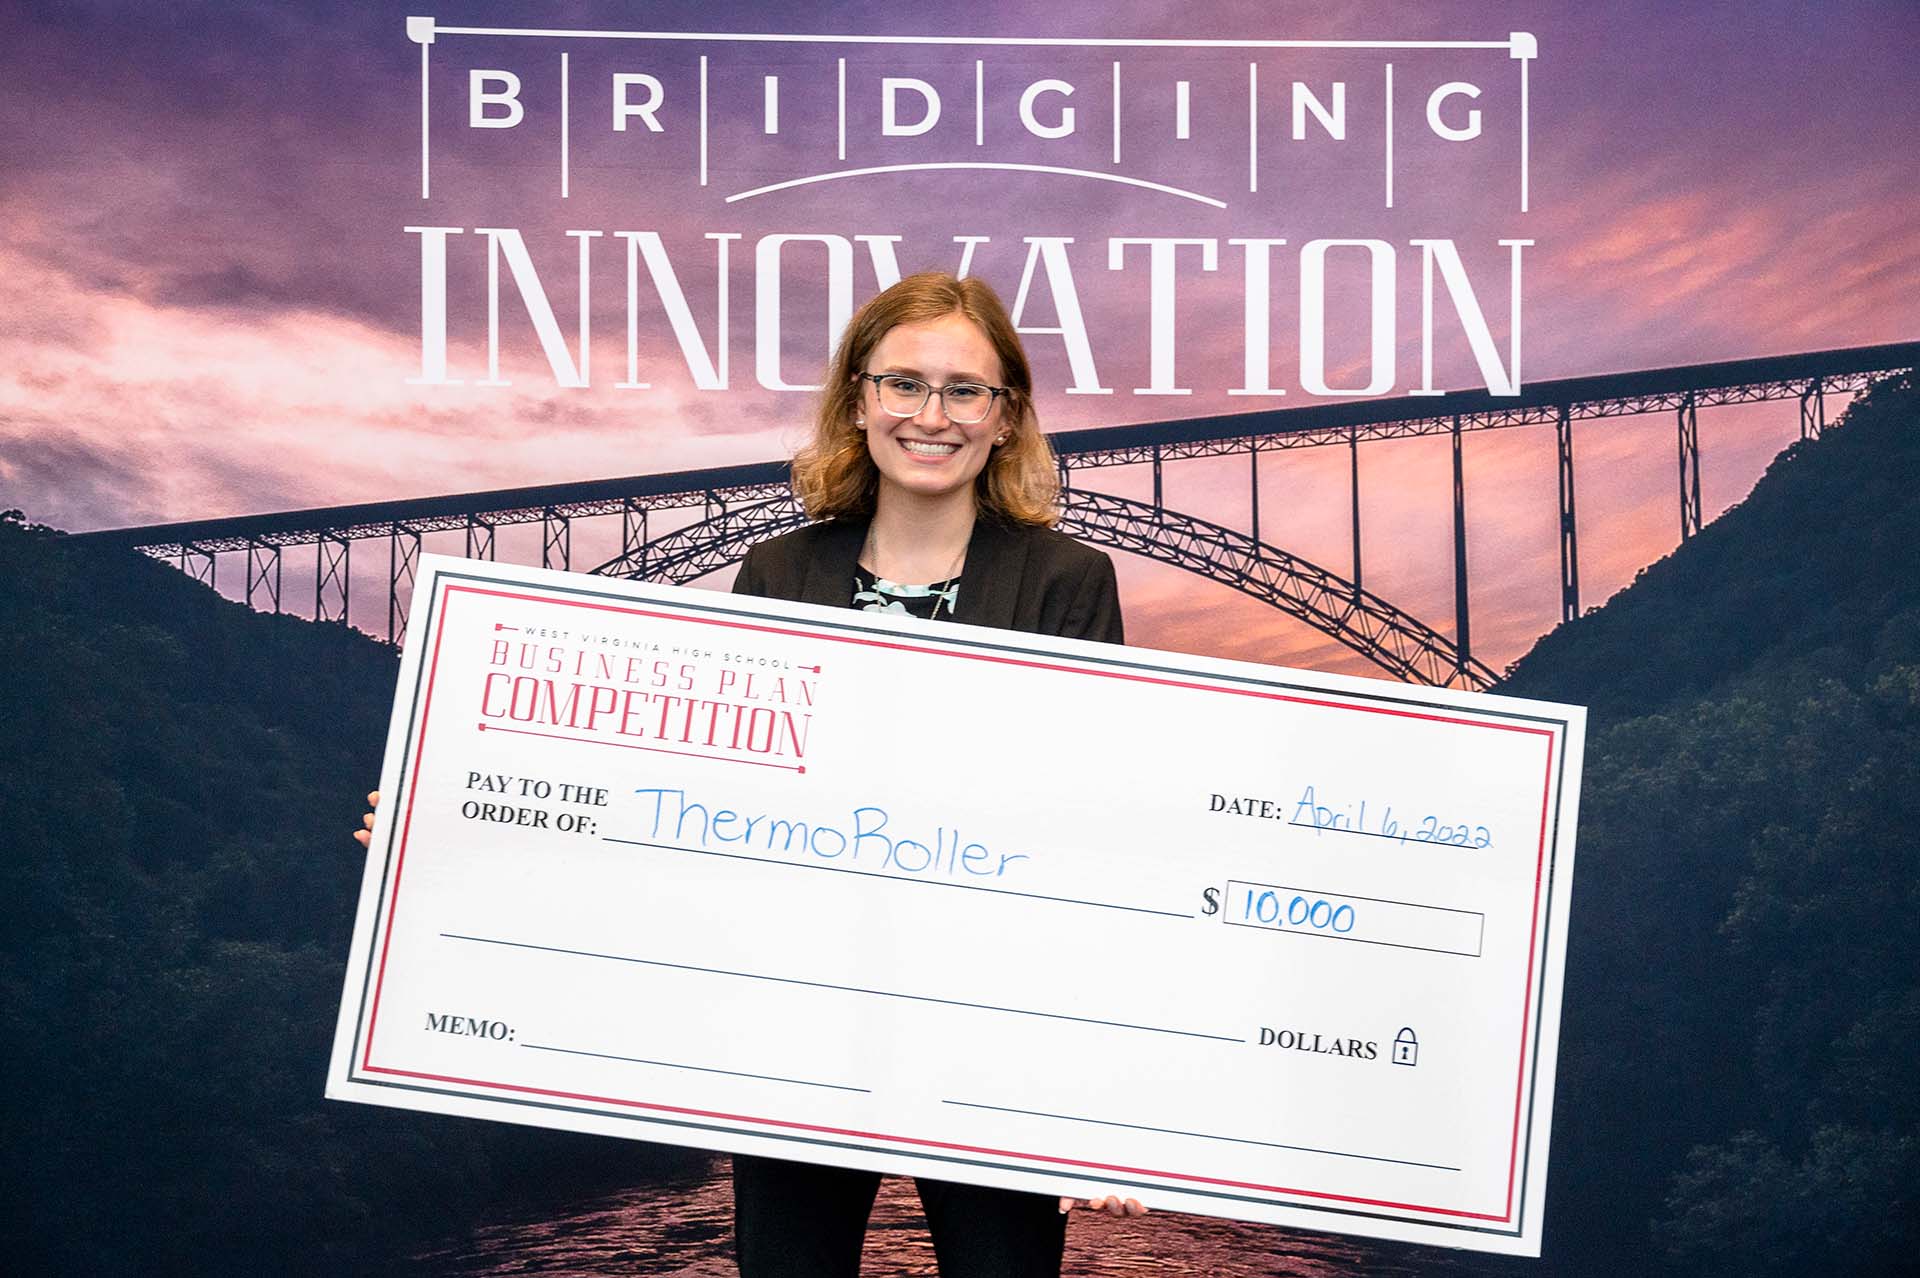 A smiling woman wearing glasses holding a large check in front of a backdrop